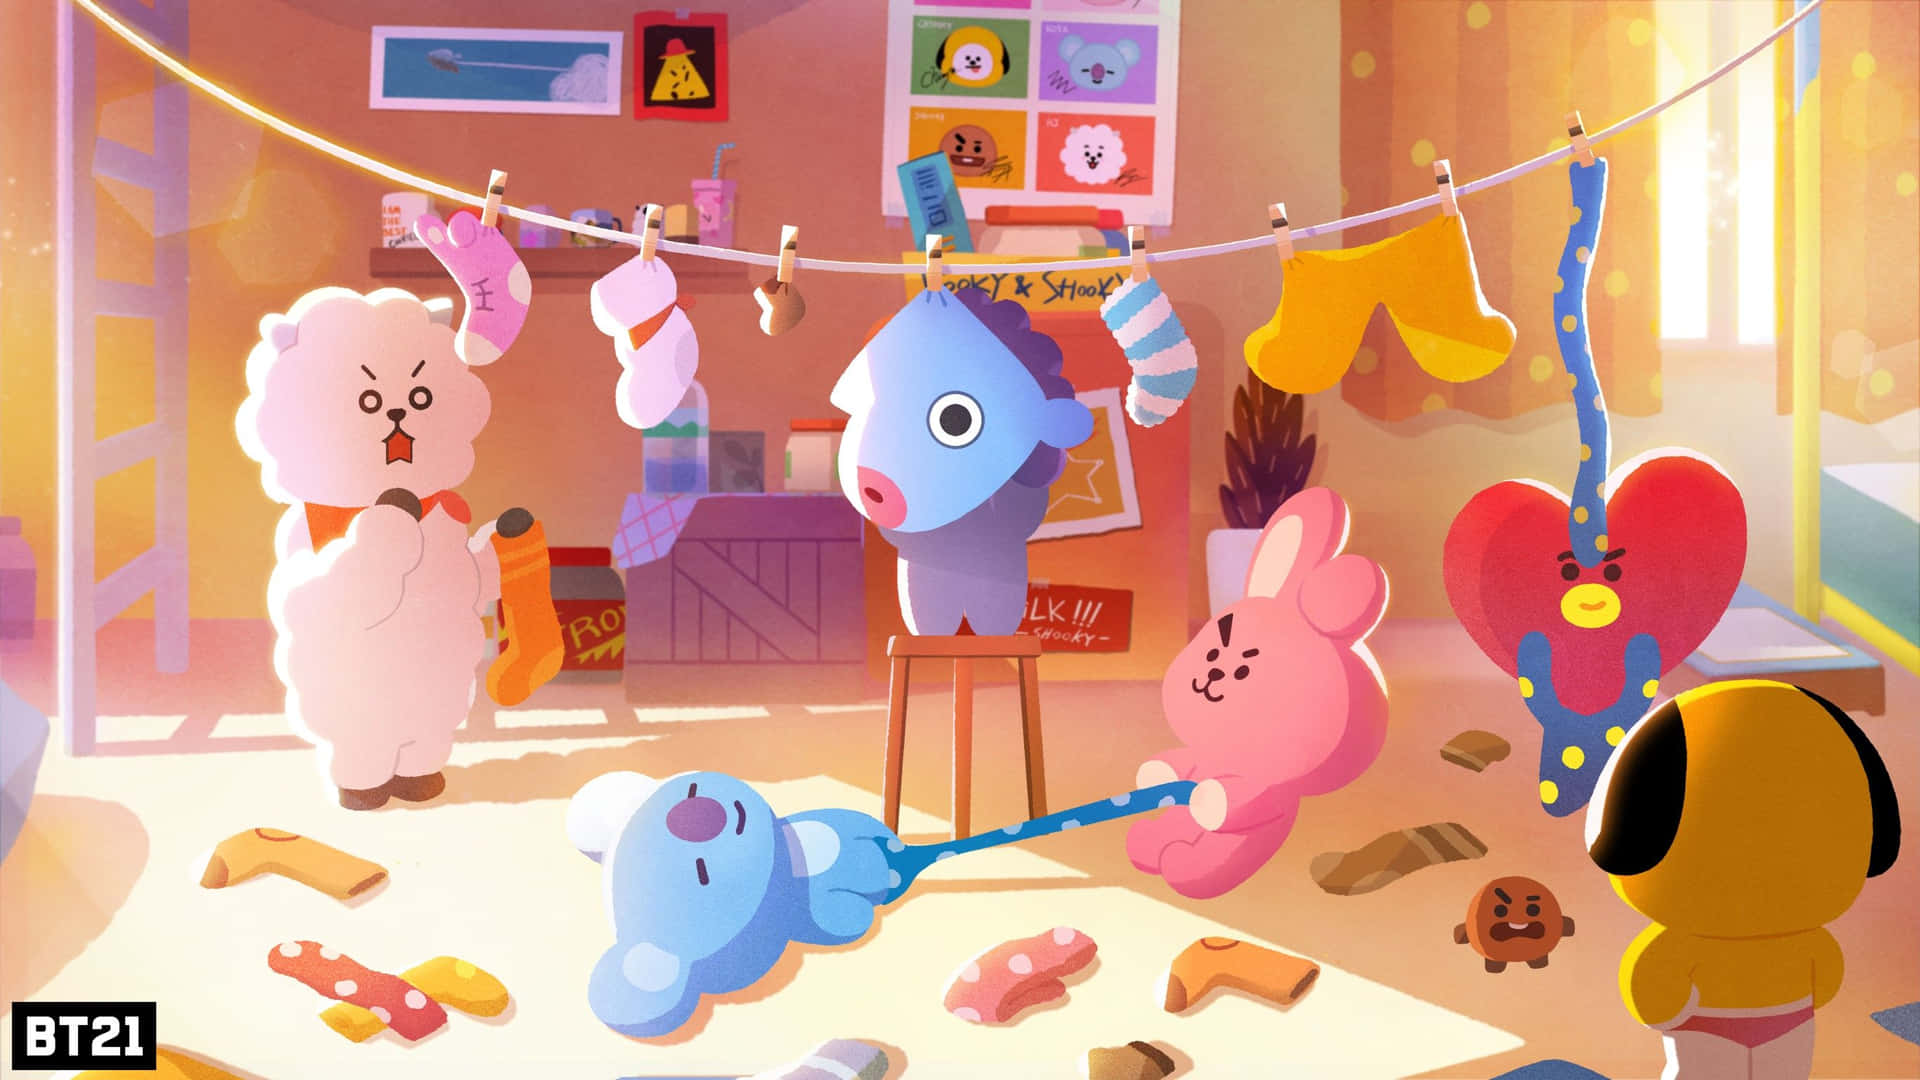 Join the Bt21 gang on their galactic adventure in 4K Wallpaper